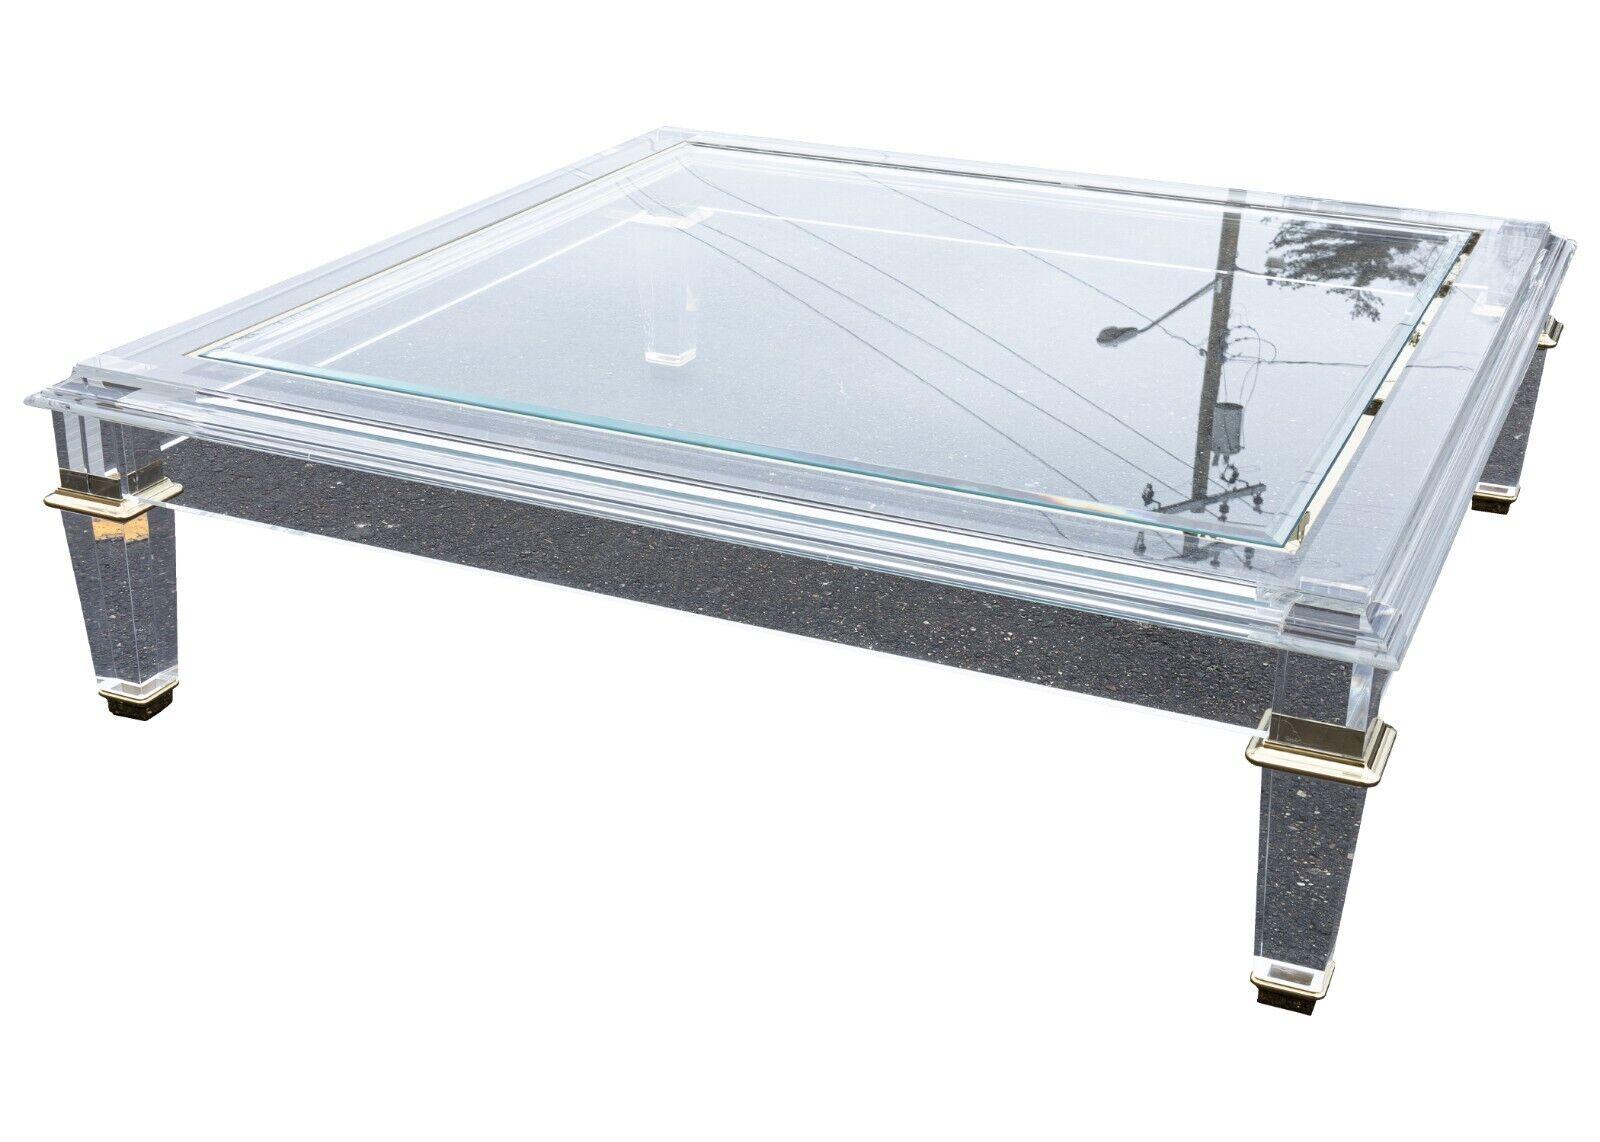 A Caracole Promethean Pierre lucite & glass coffee table. This stunning piece is for any modern furniture lover. The lucite, chrome, and glass construction creates a very unique viewing experience. This table is a great accent piece to add to any